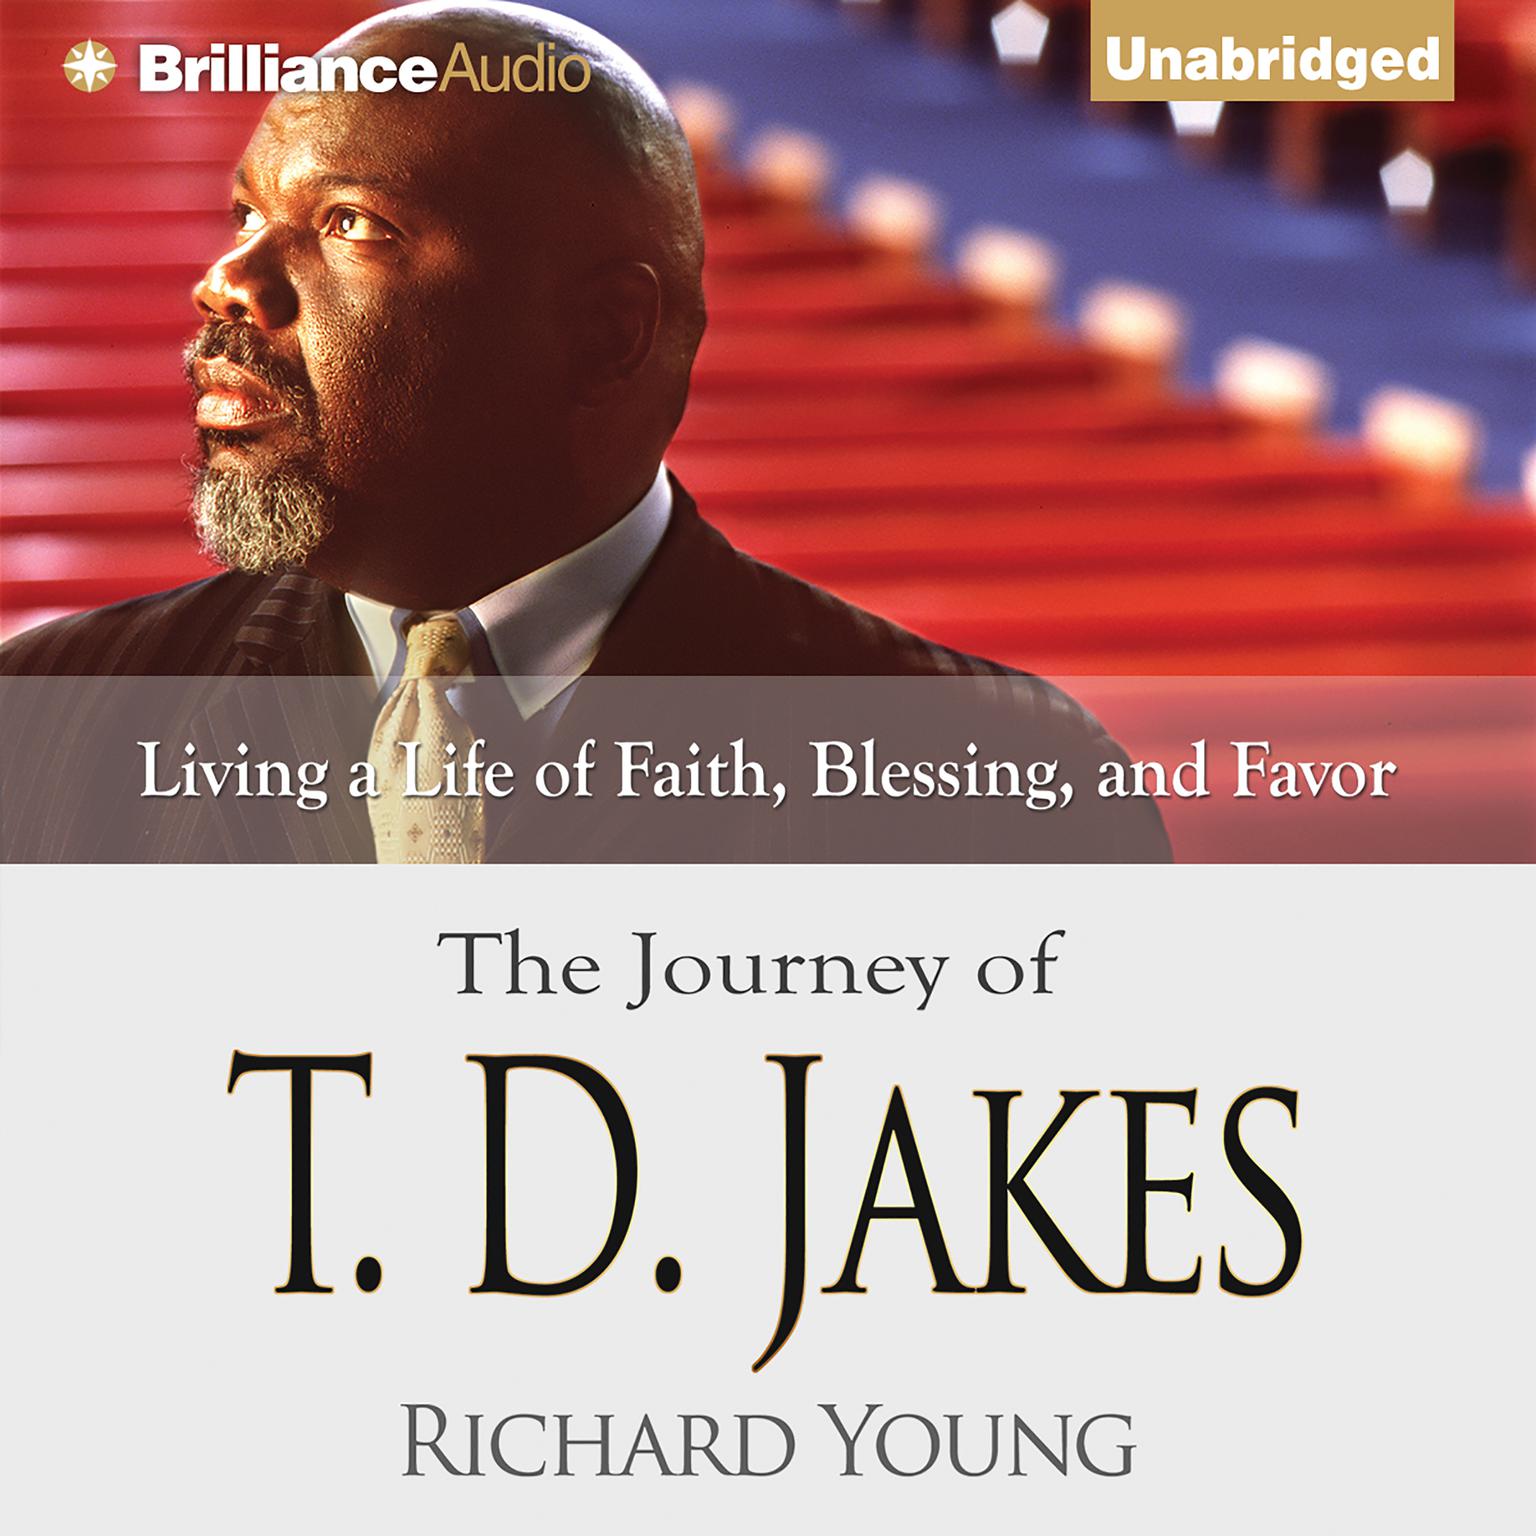 The Journey of T. D. Jakes: Living a Life of Faith, Blessing, and Favor Audiobook, by Richard Young